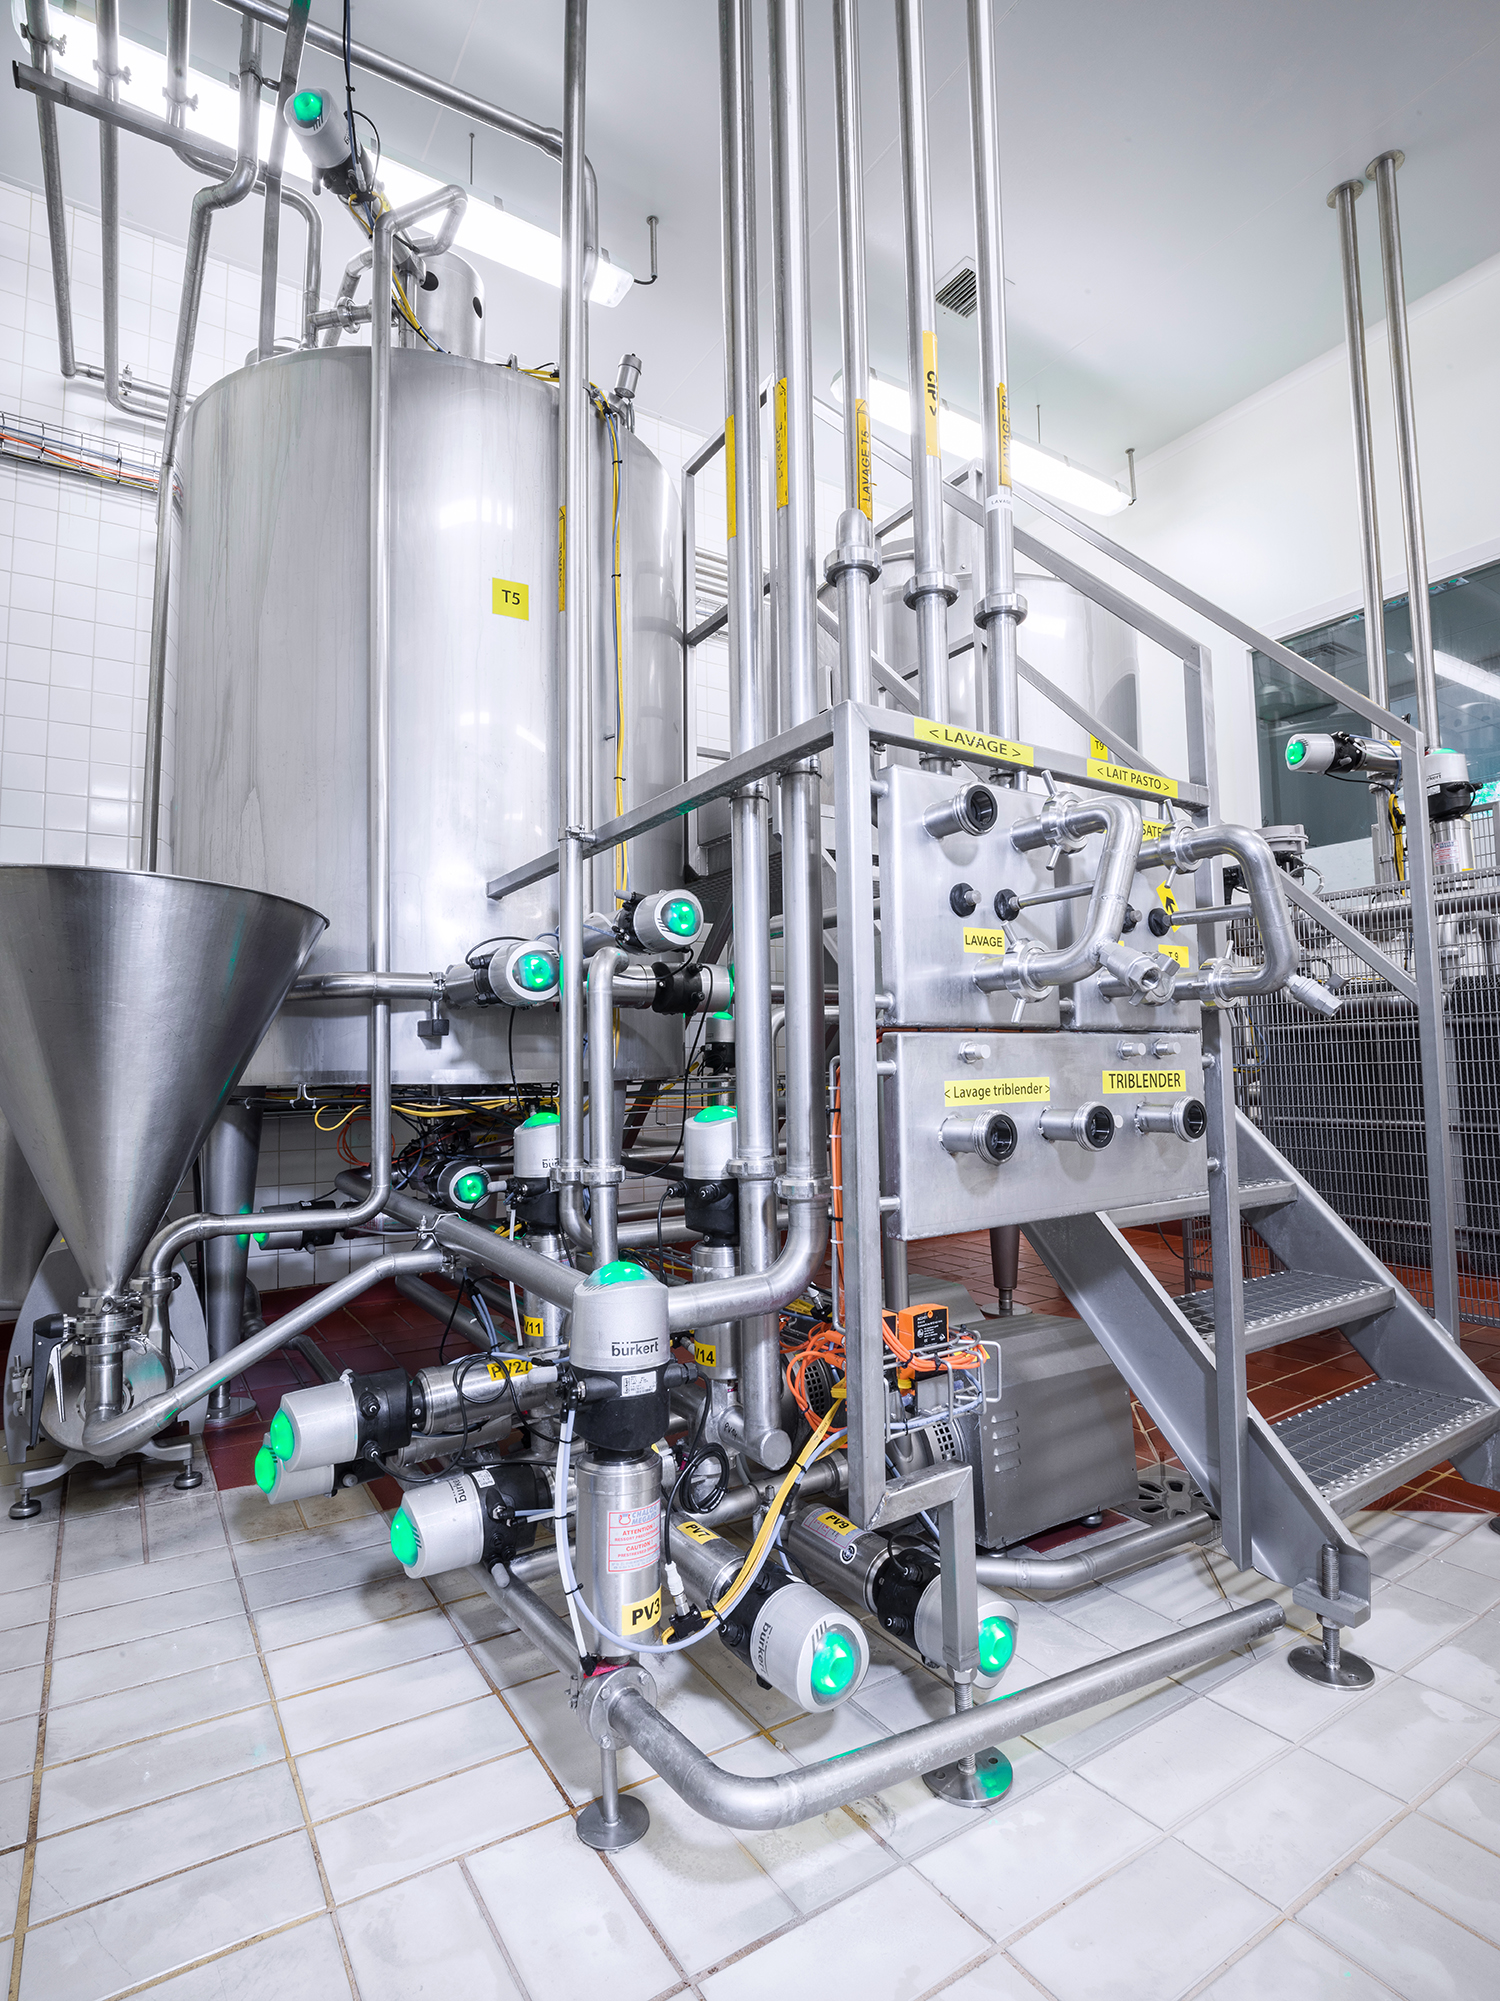 ENILBIO, the National School of the Dairy Industry and Biotechnology in France, has chosen the universal control head Type 8681 from Bürkert to ensure the homogenisation of the control on one of its sites.